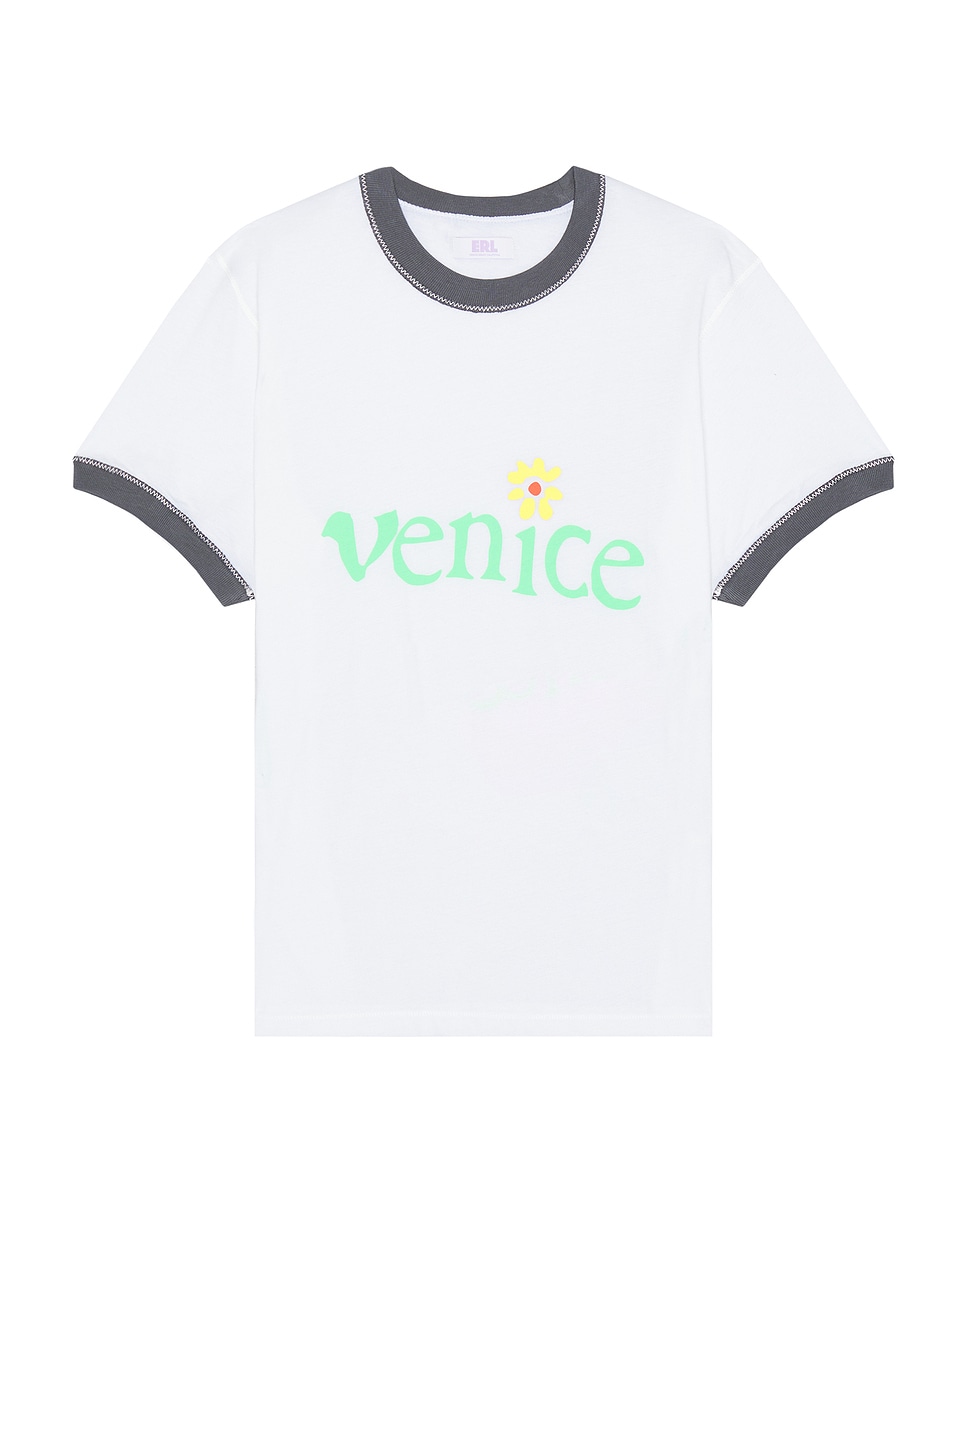 Image 1 of ERL Unisex Venice T-Shirt Knit in White